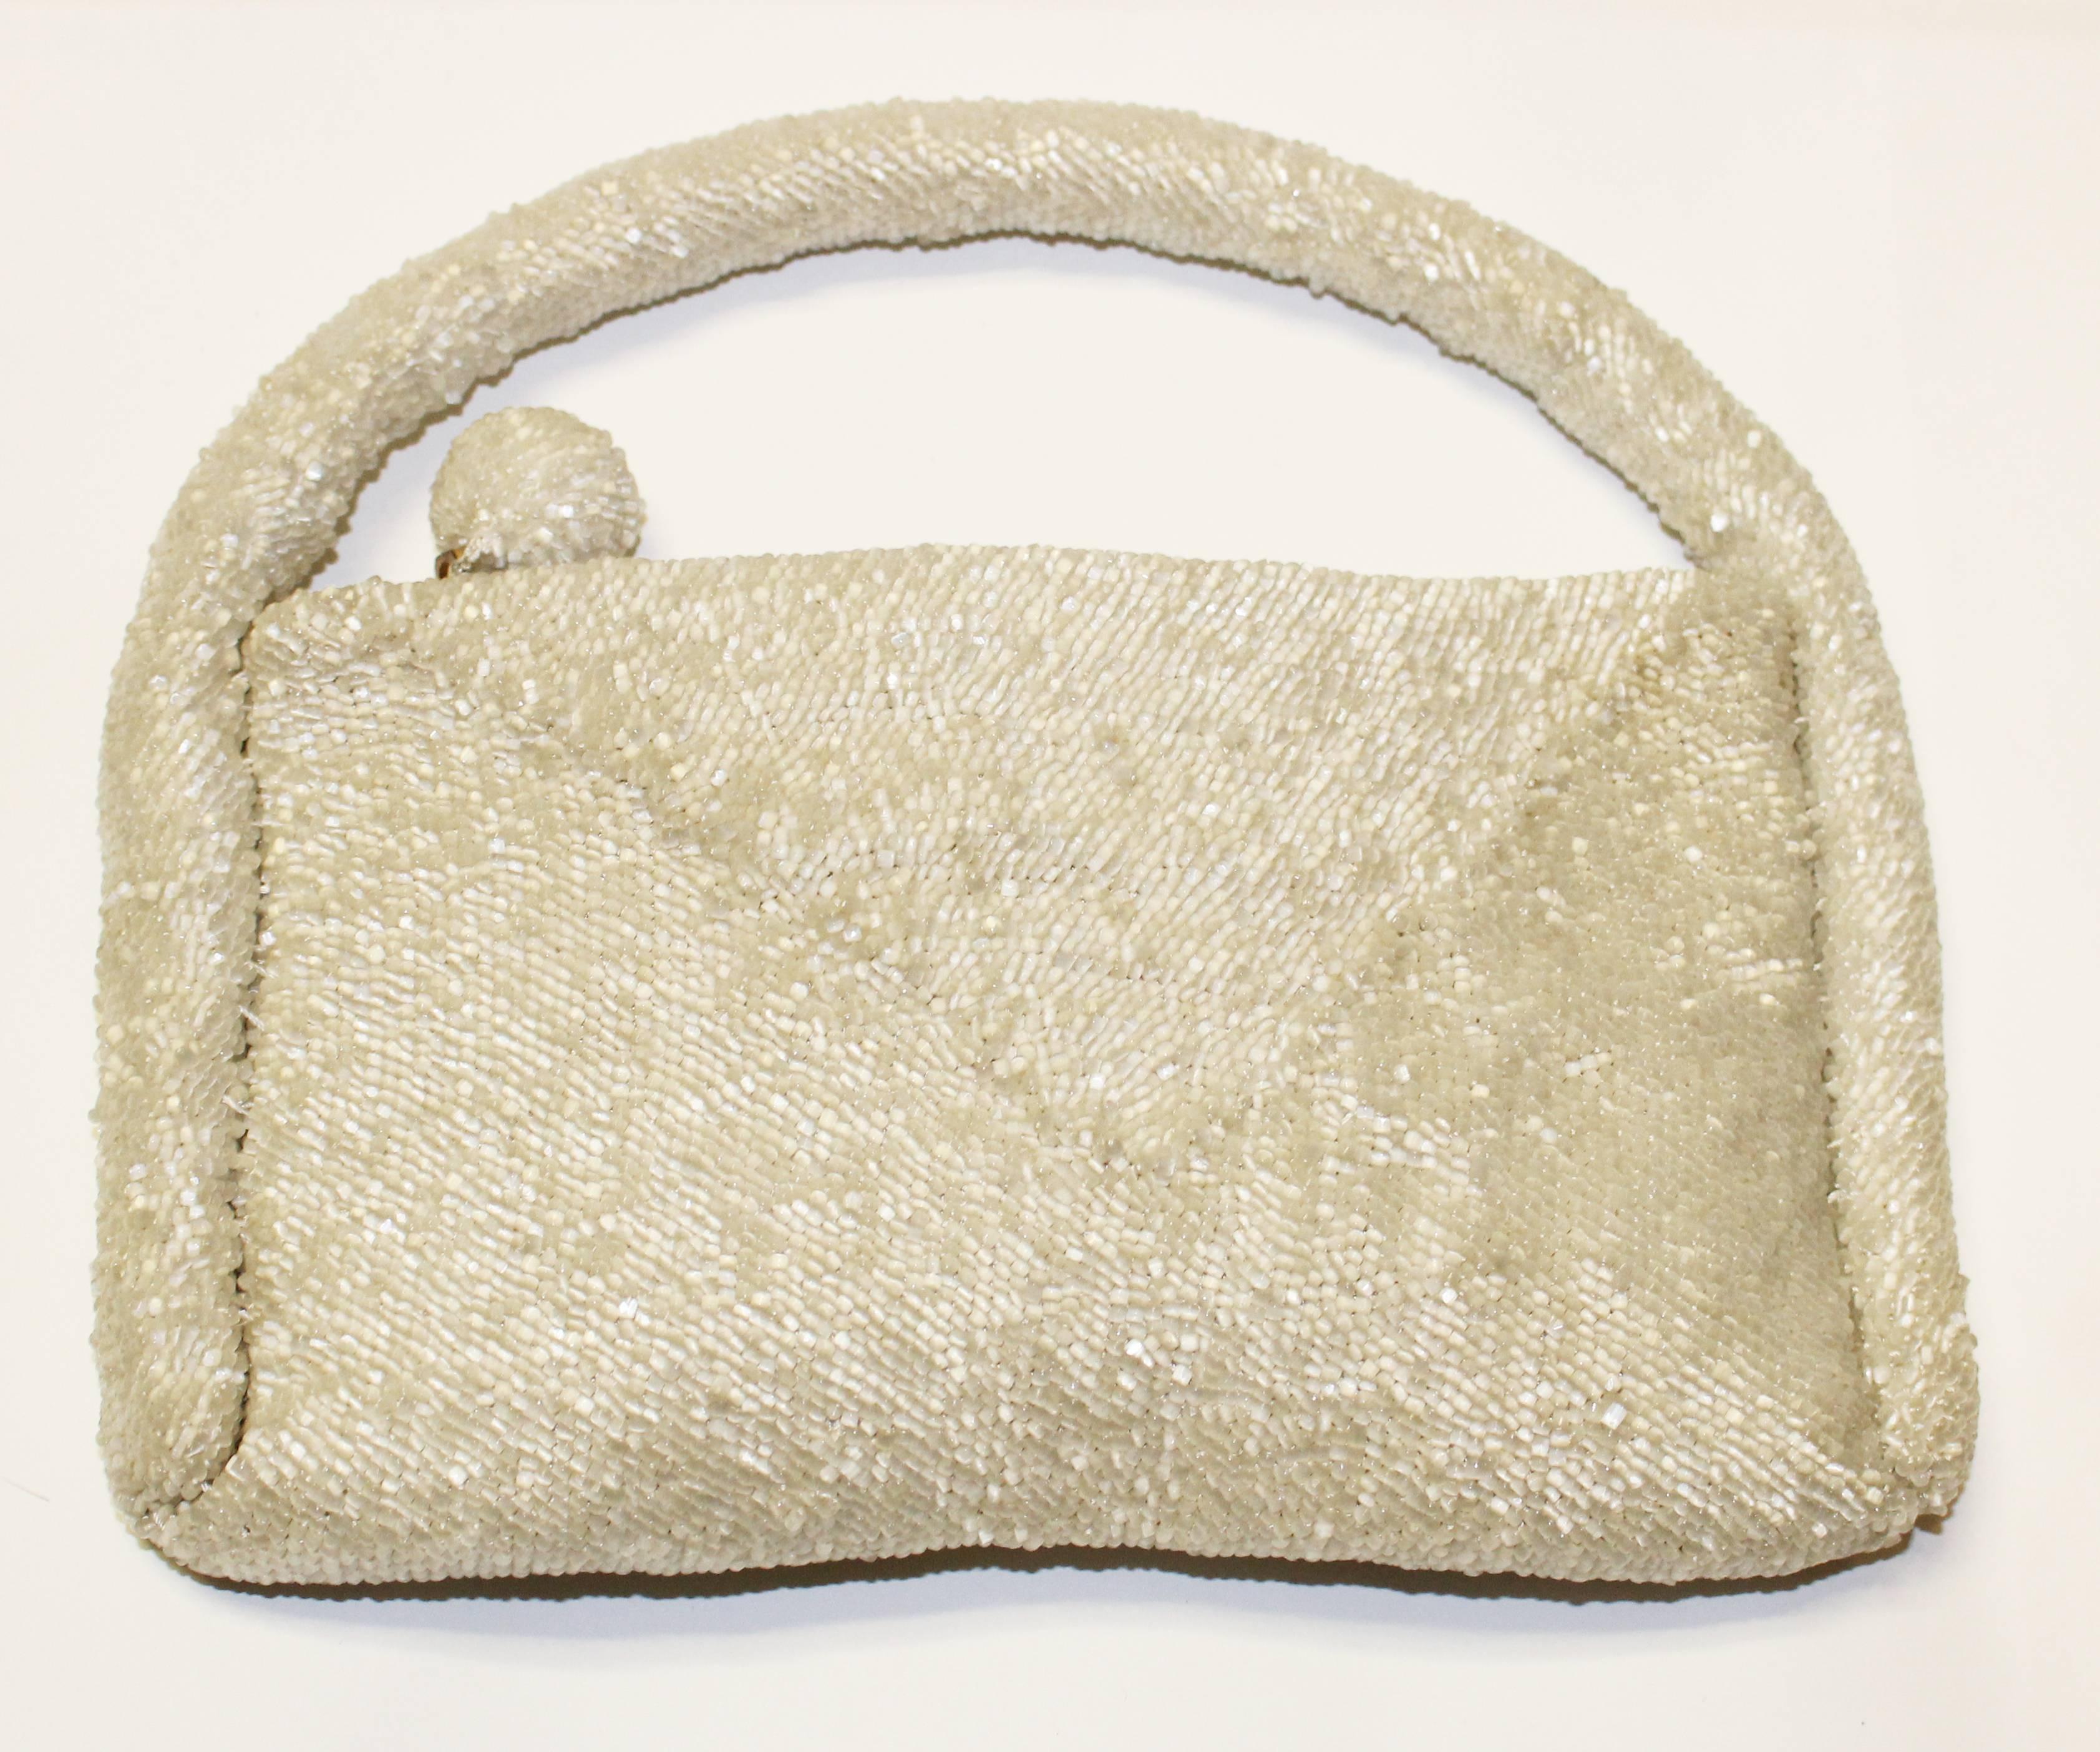 1930's ivory hand-beaded purse with beaded snowball zipper-pull and wrap-around handle. 

Measurements:
Width: 9